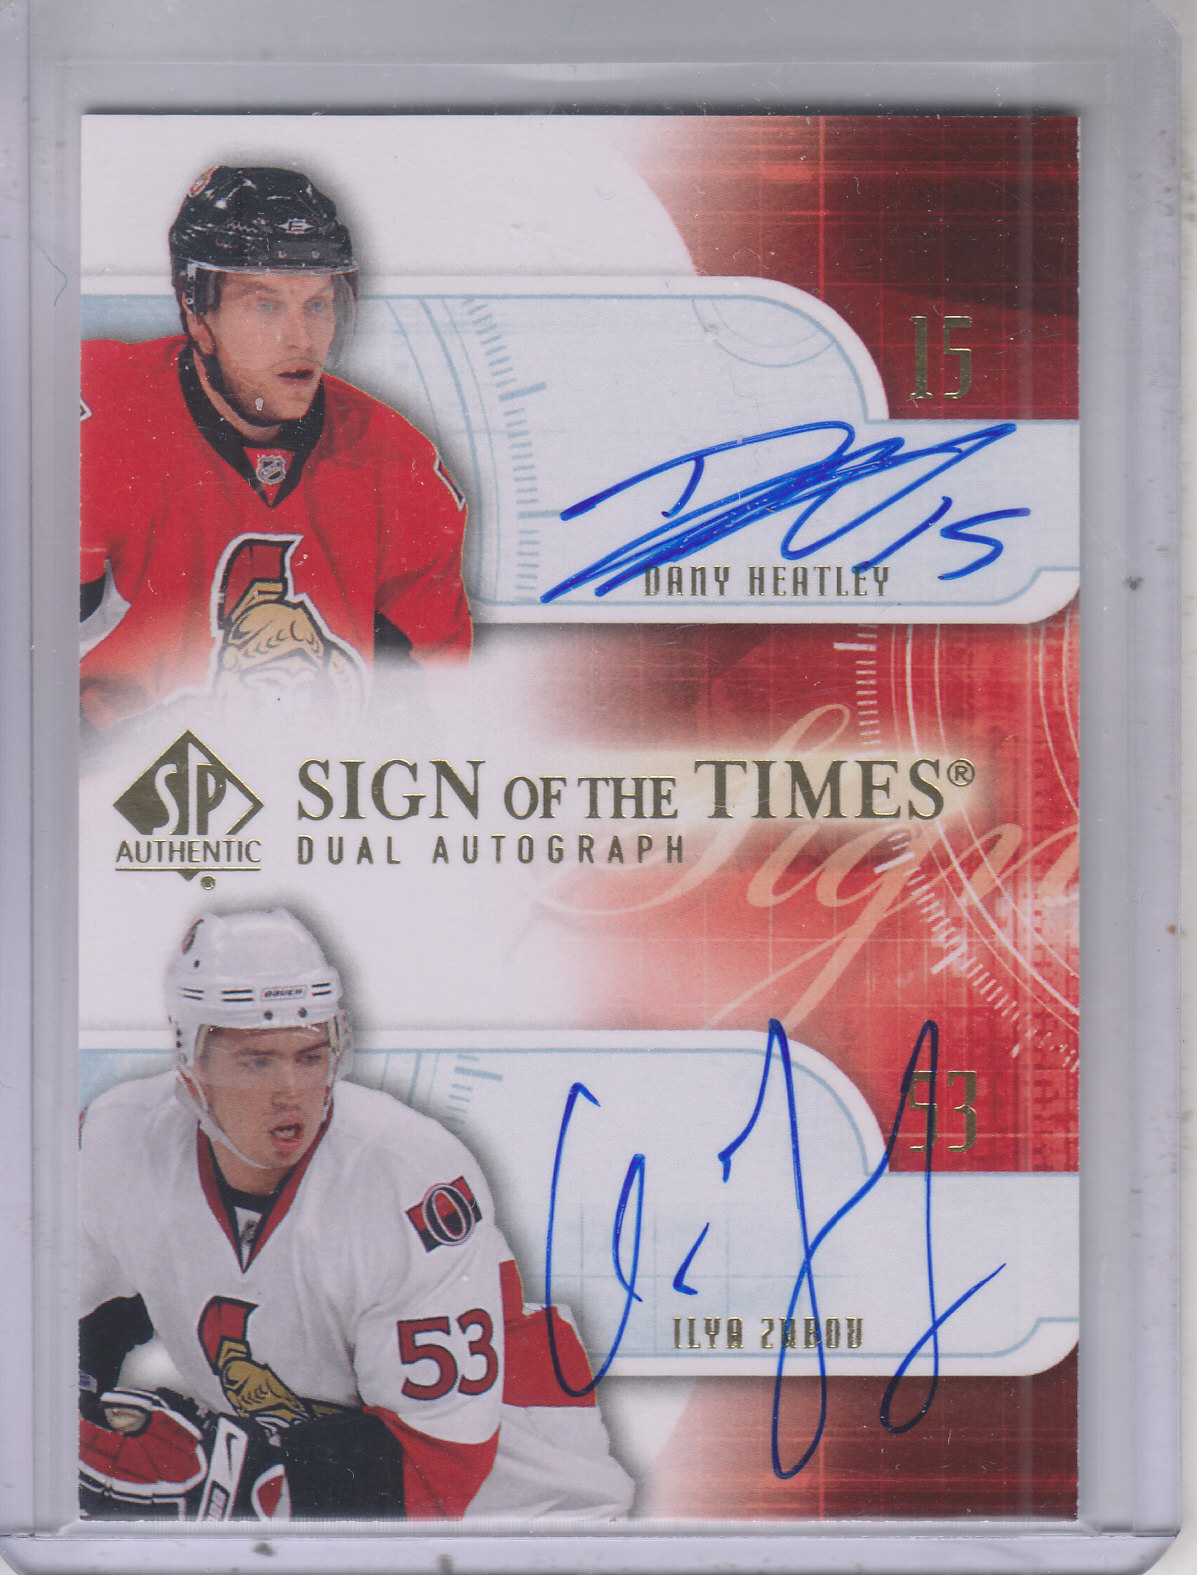 2008-09 SP Authentic Sign of the Times Duals #ST2HZ Dany Heatley/Ilya Zubov